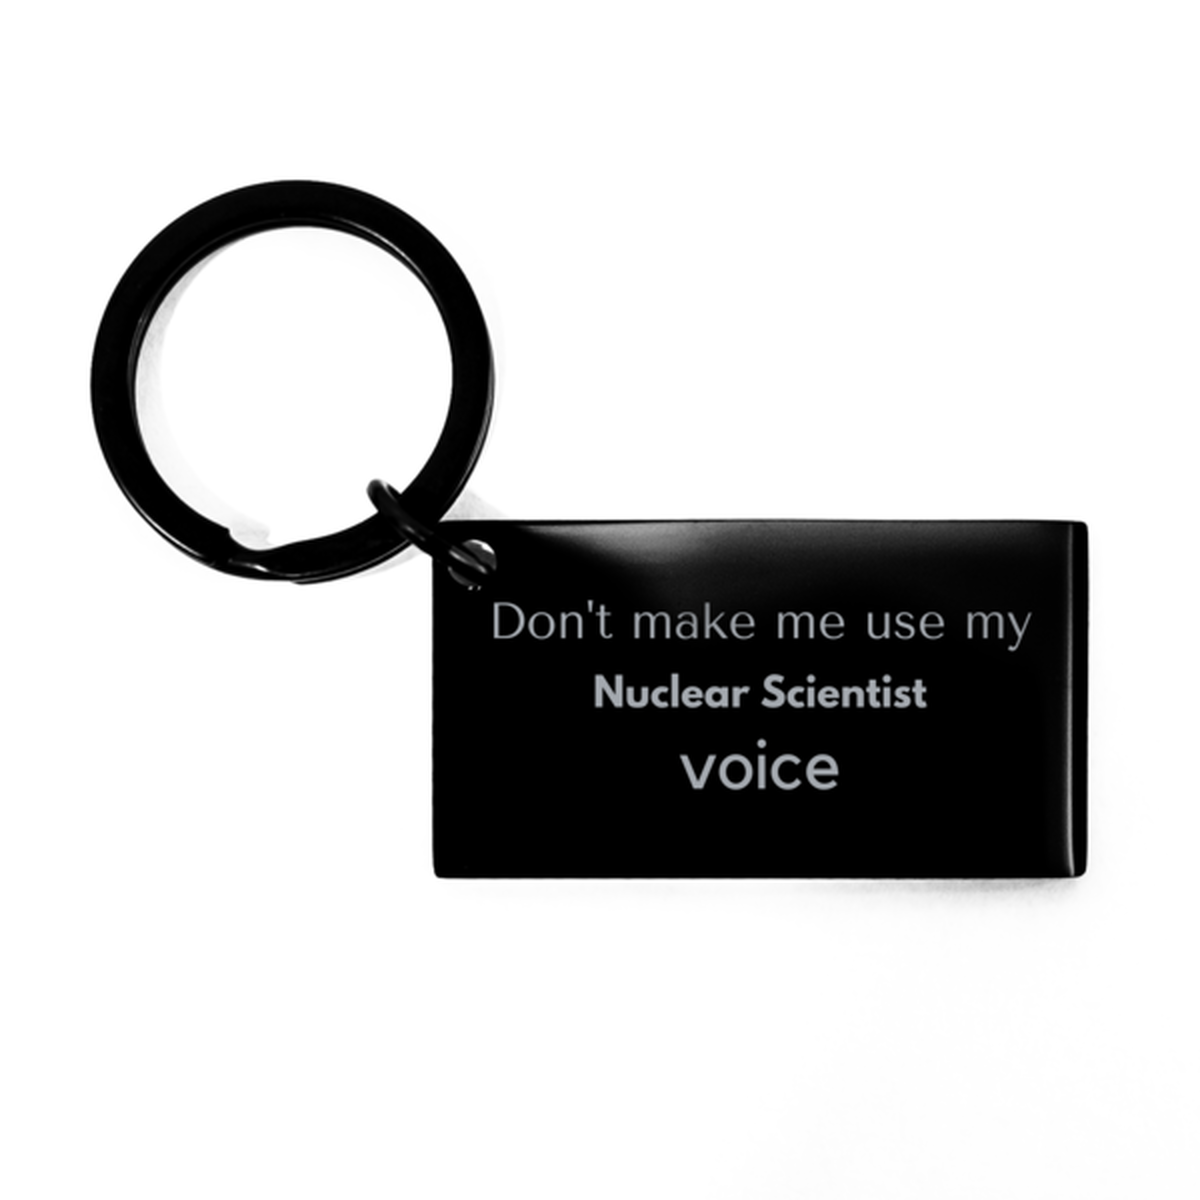 Don't make me use my Nuclear Scientist voice, Sarcasm Nuclear Scientist Gifts, Christmas Nuclear Scientist Keychain Birthday Unique Gifts For Nuclear Scientist Coworkers, Men, Women, Colleague, Friends